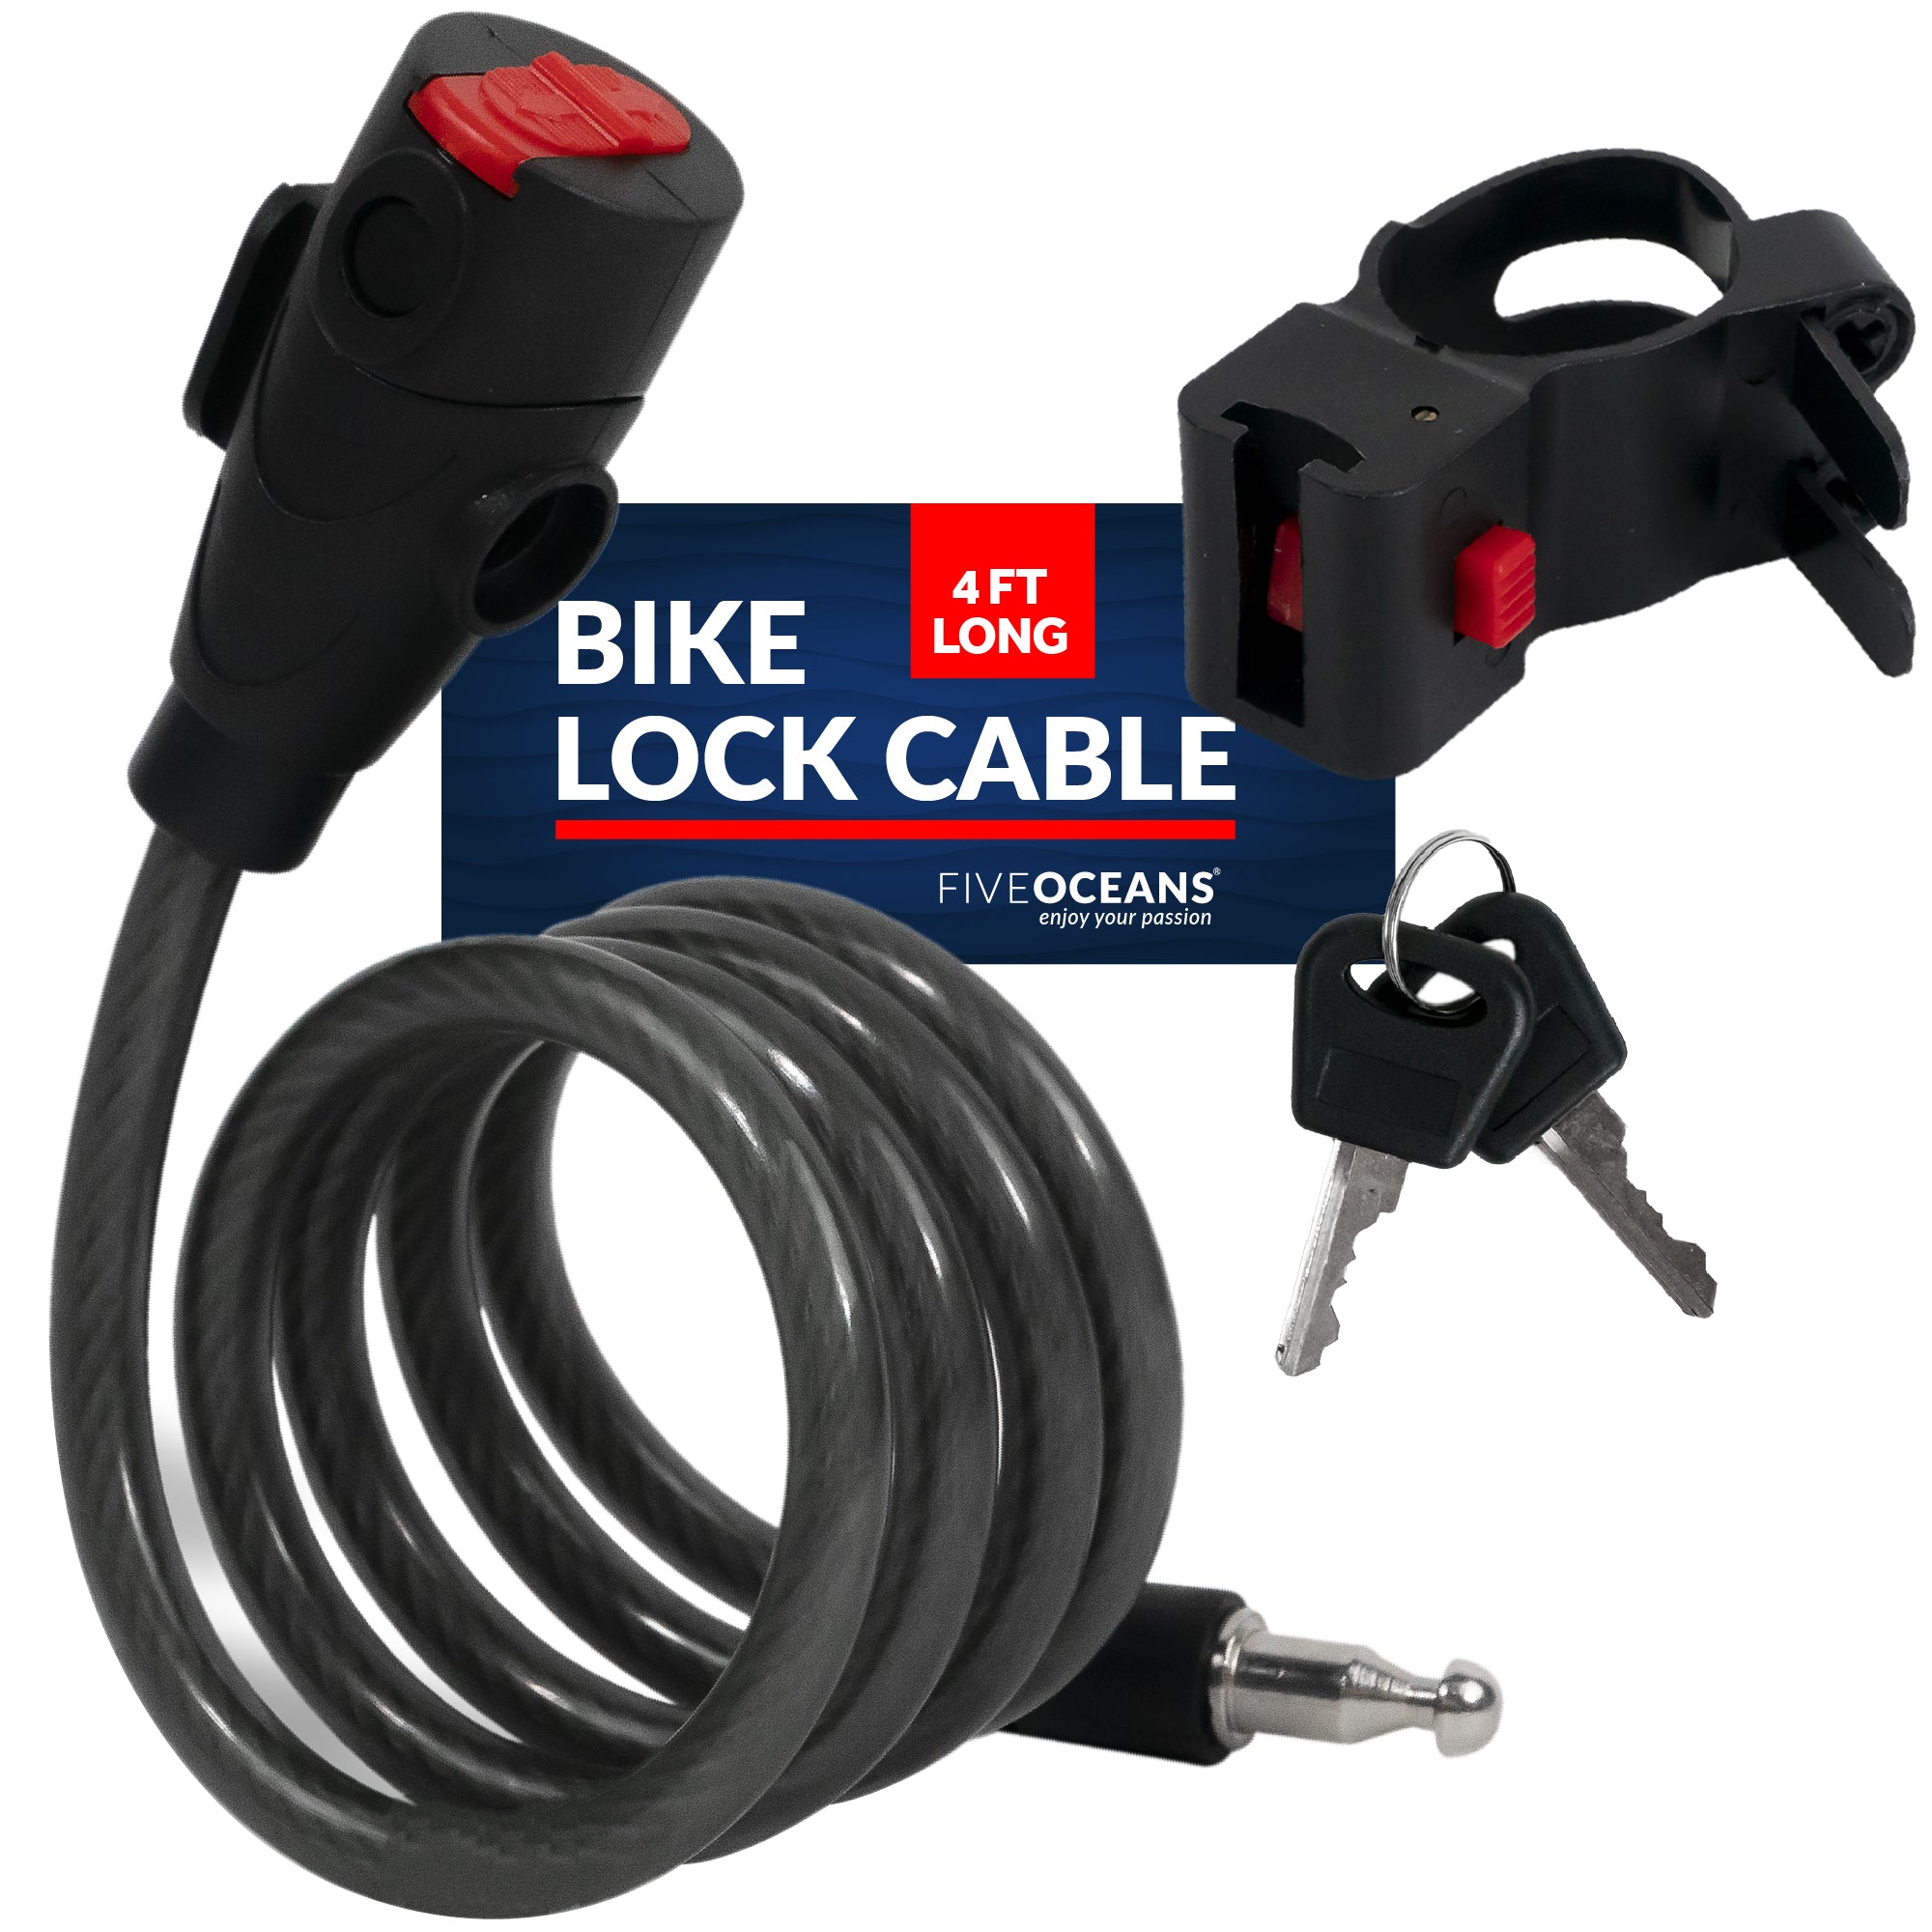 Bike Lock Cable, Keyed, with Mounting Bracket, 4' - FO3956